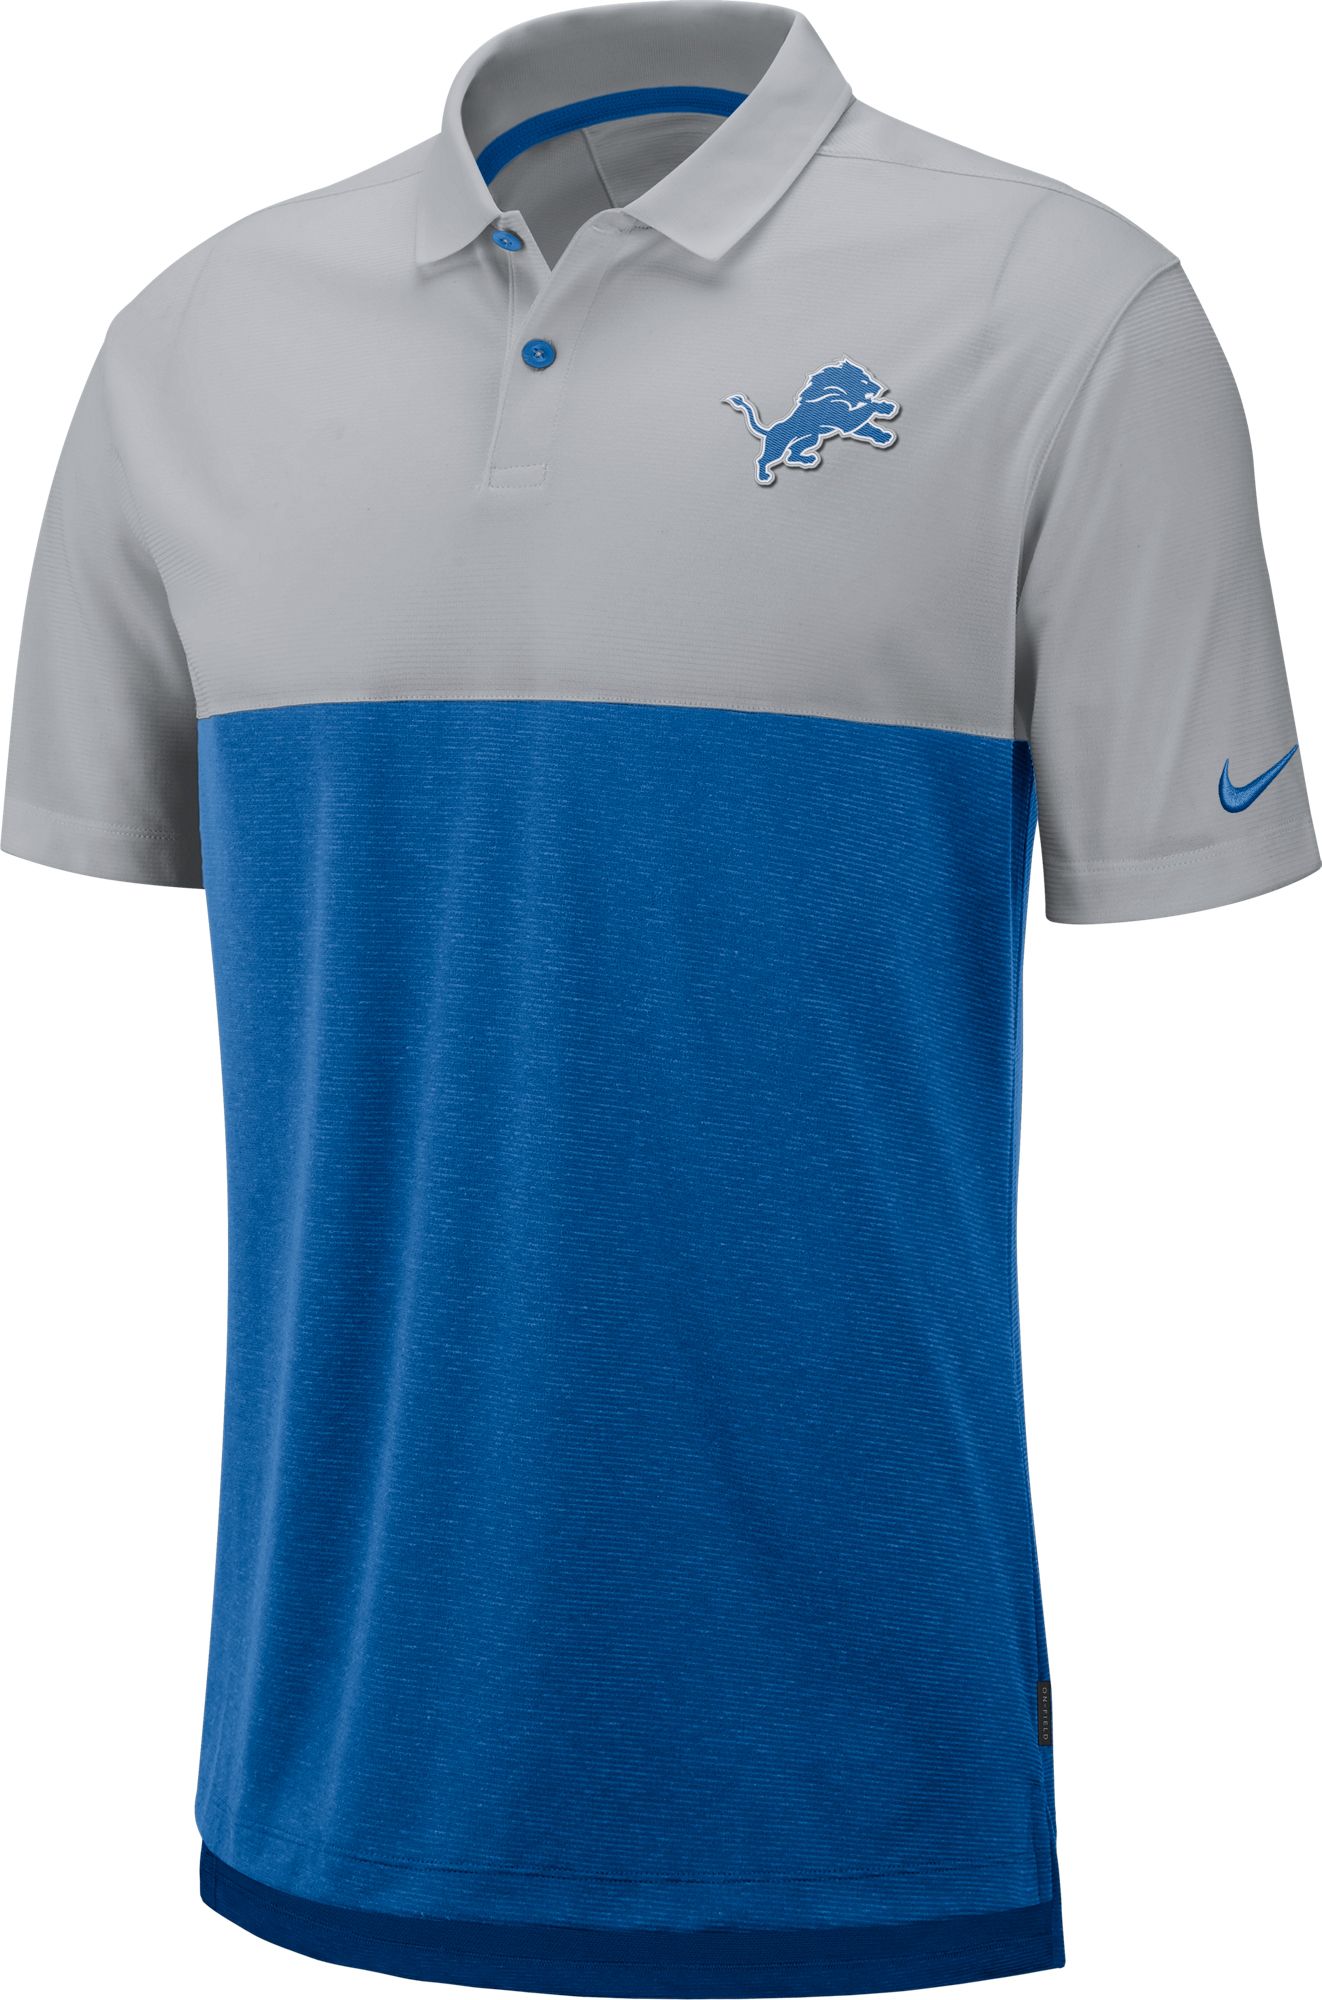 detroit lions polo shirts clearance